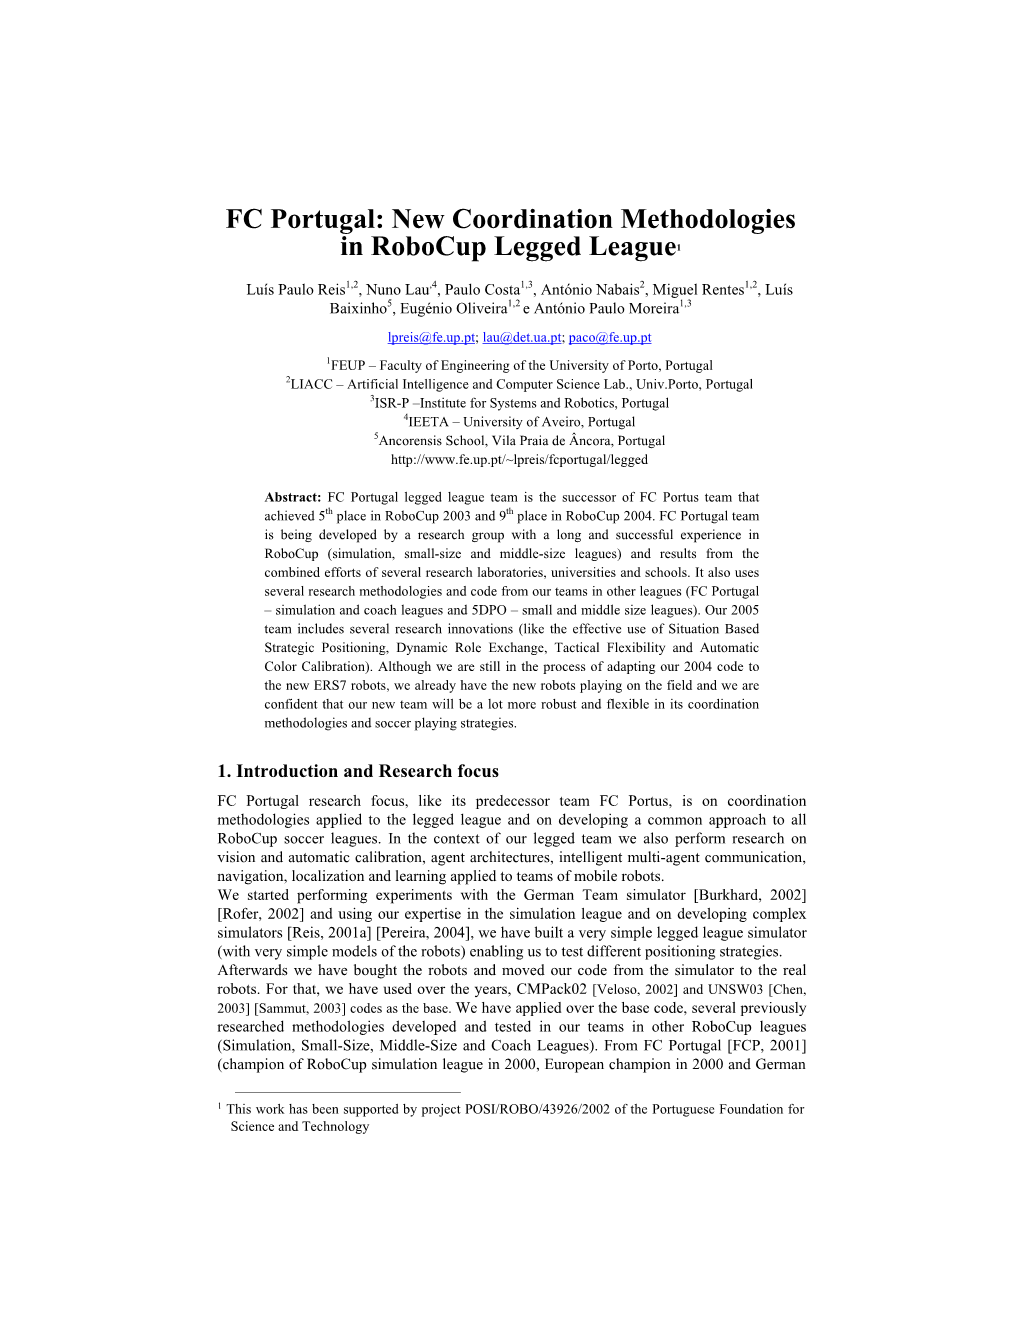 FC Portugal: New Coordination Methodologies in Robocup Legged League1